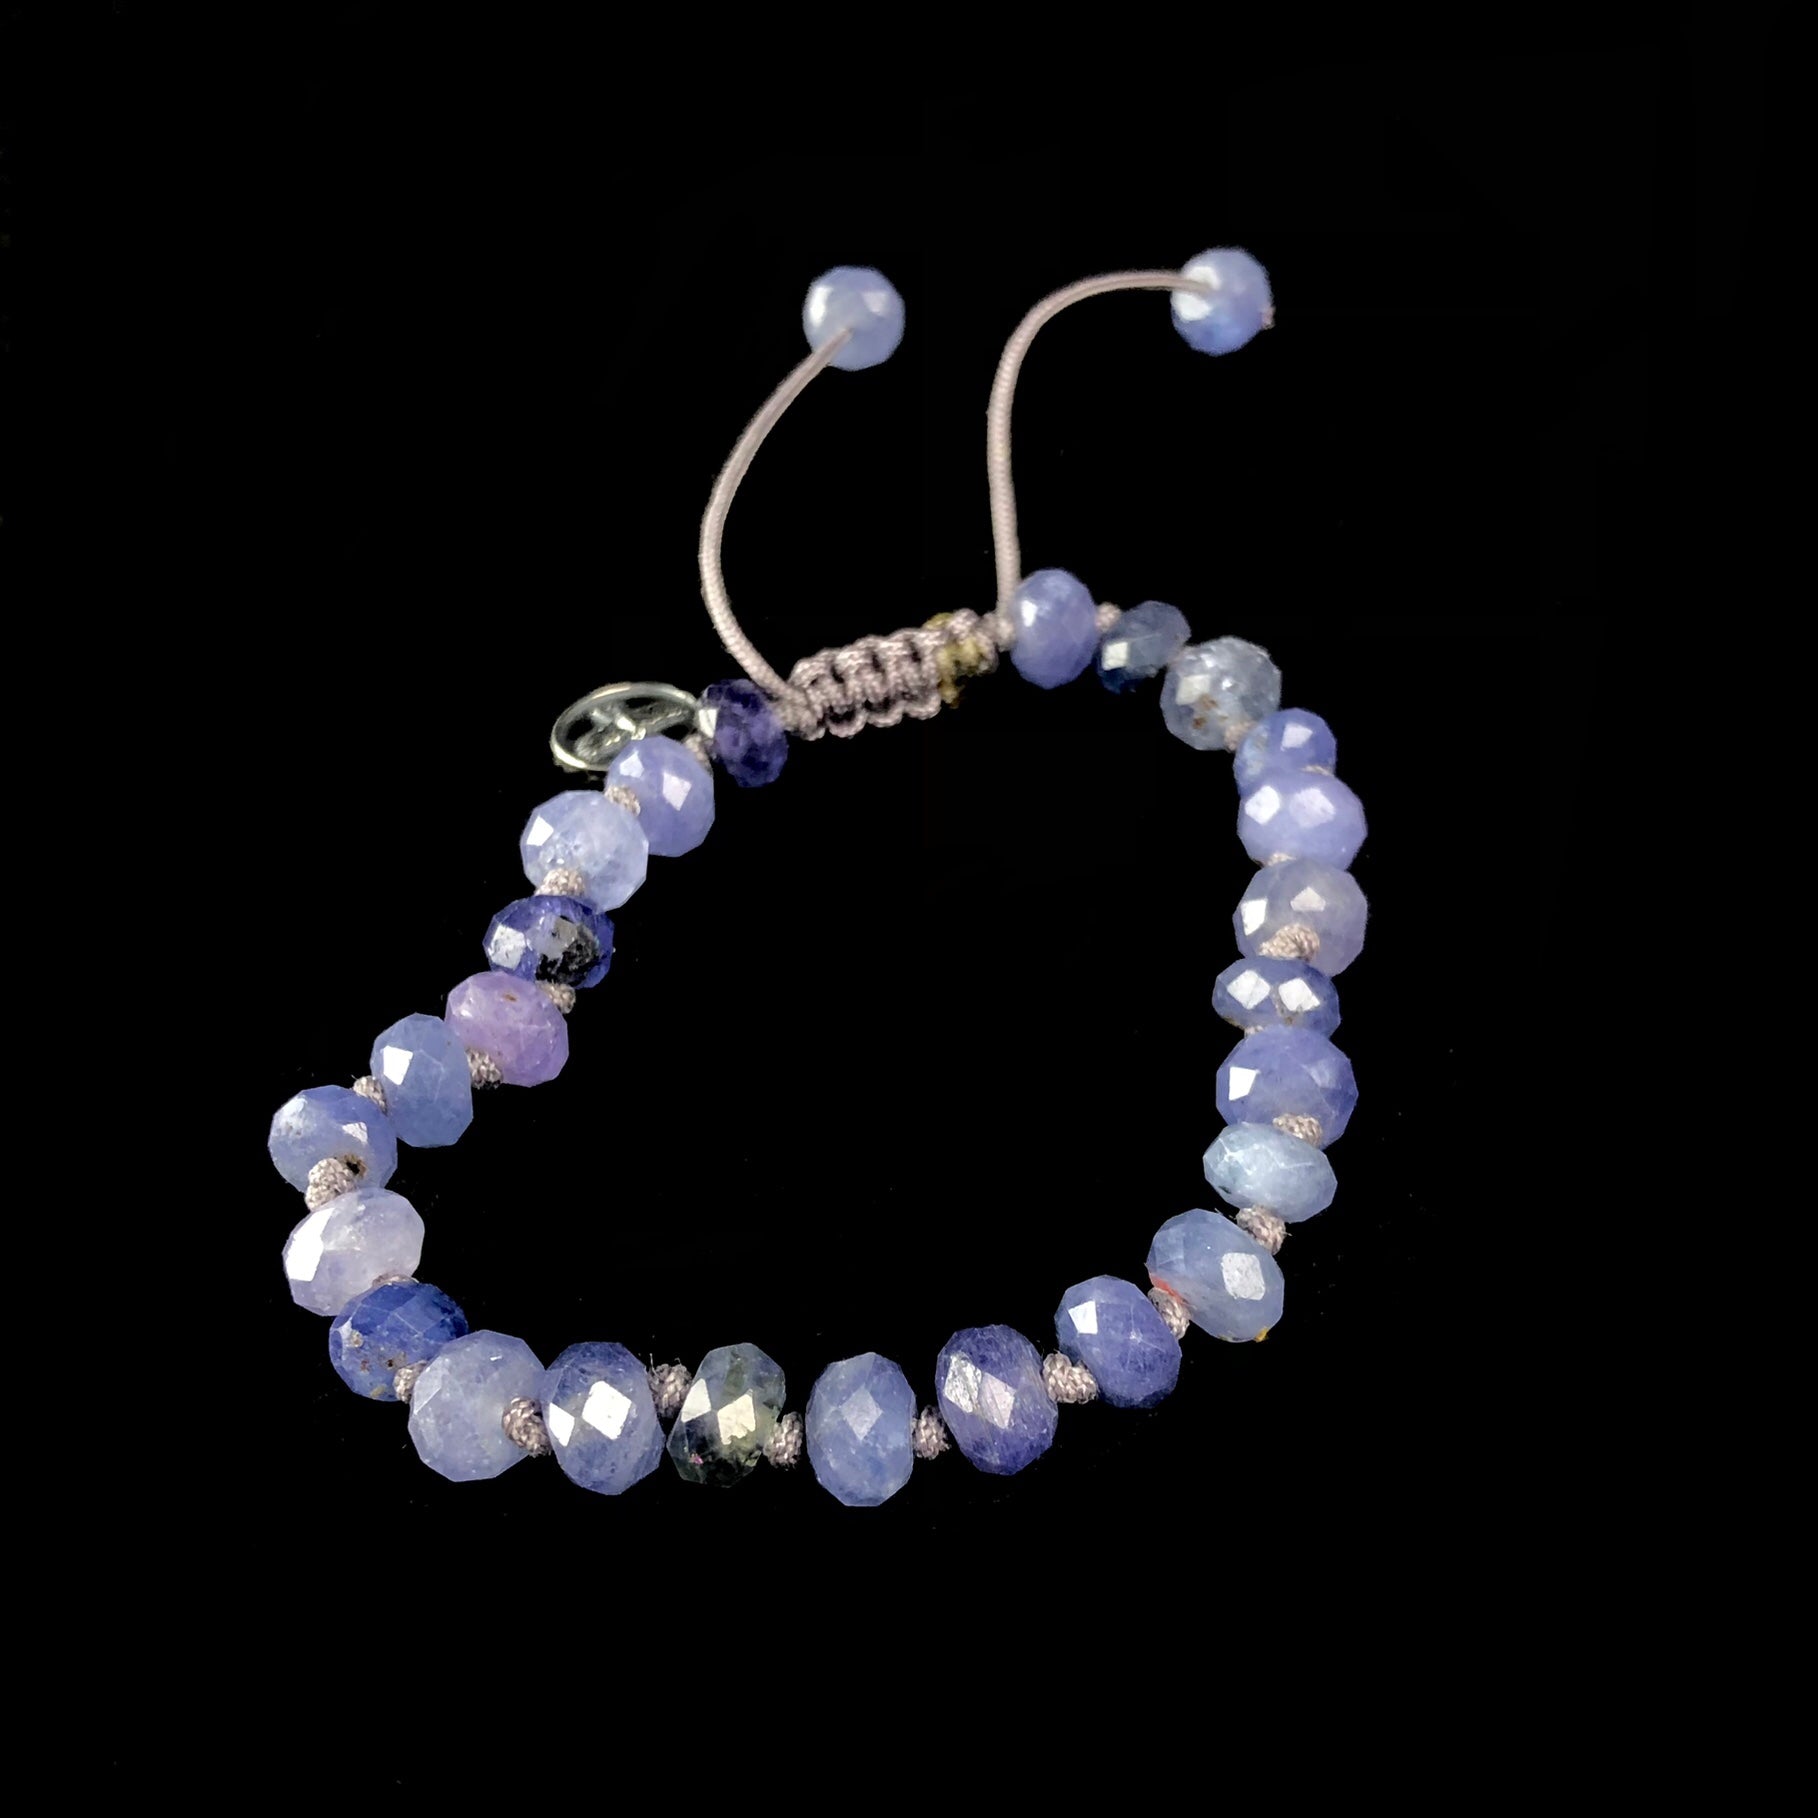 Lavender colored stone bead bracelet on knotted on lavender colored cord 